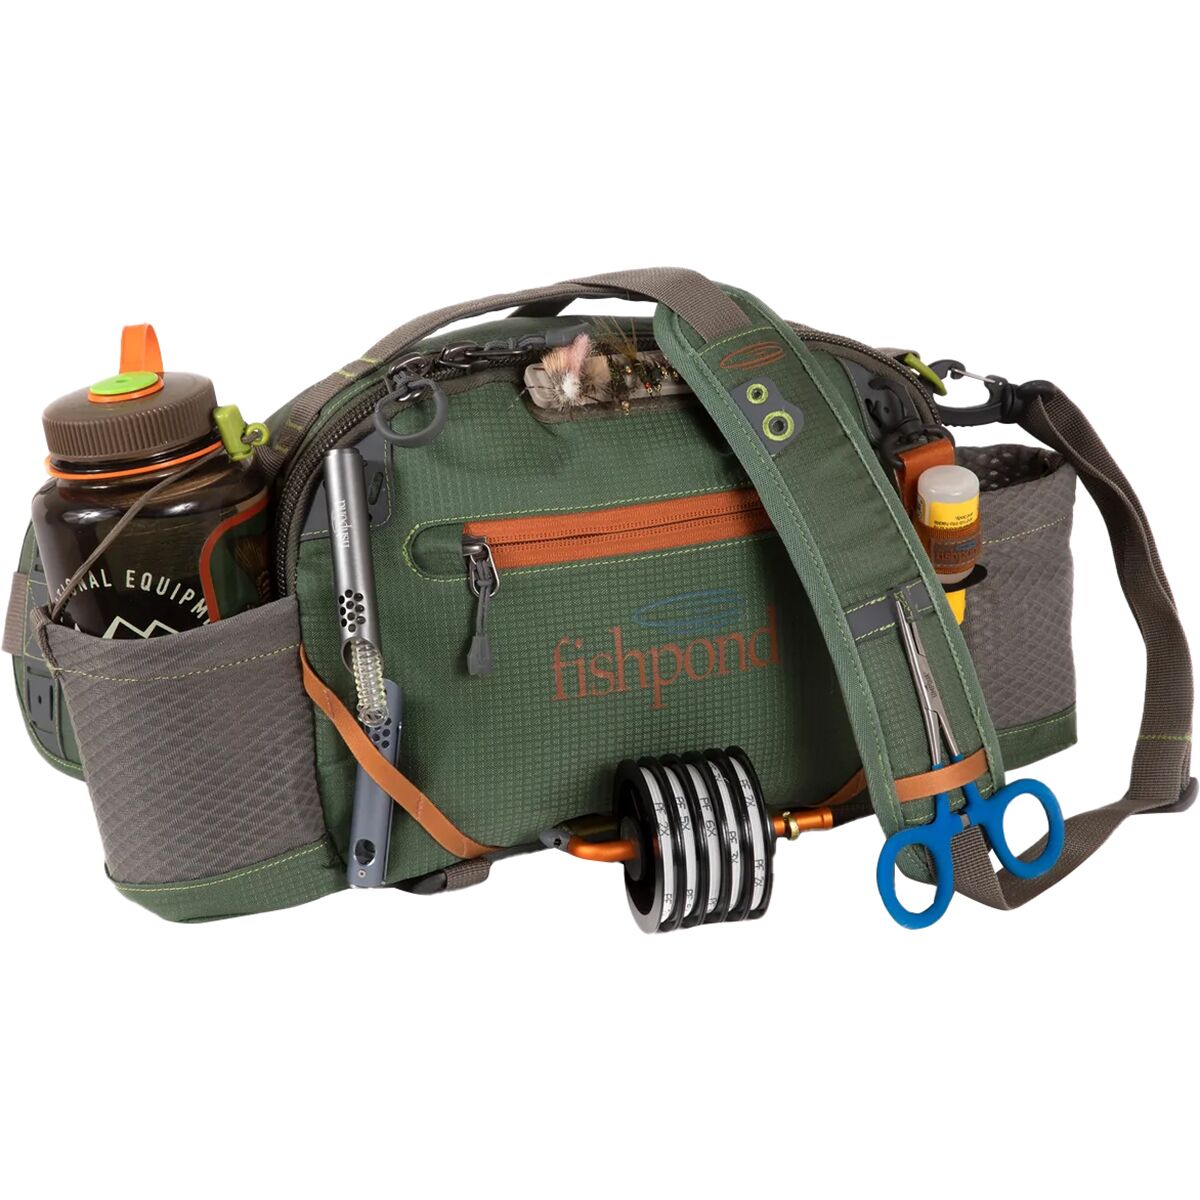 Fishpond Elkhorn Lumbar Pack Tortuga Fly Fishing Waist Pack with tags  EHLP-T for sale online